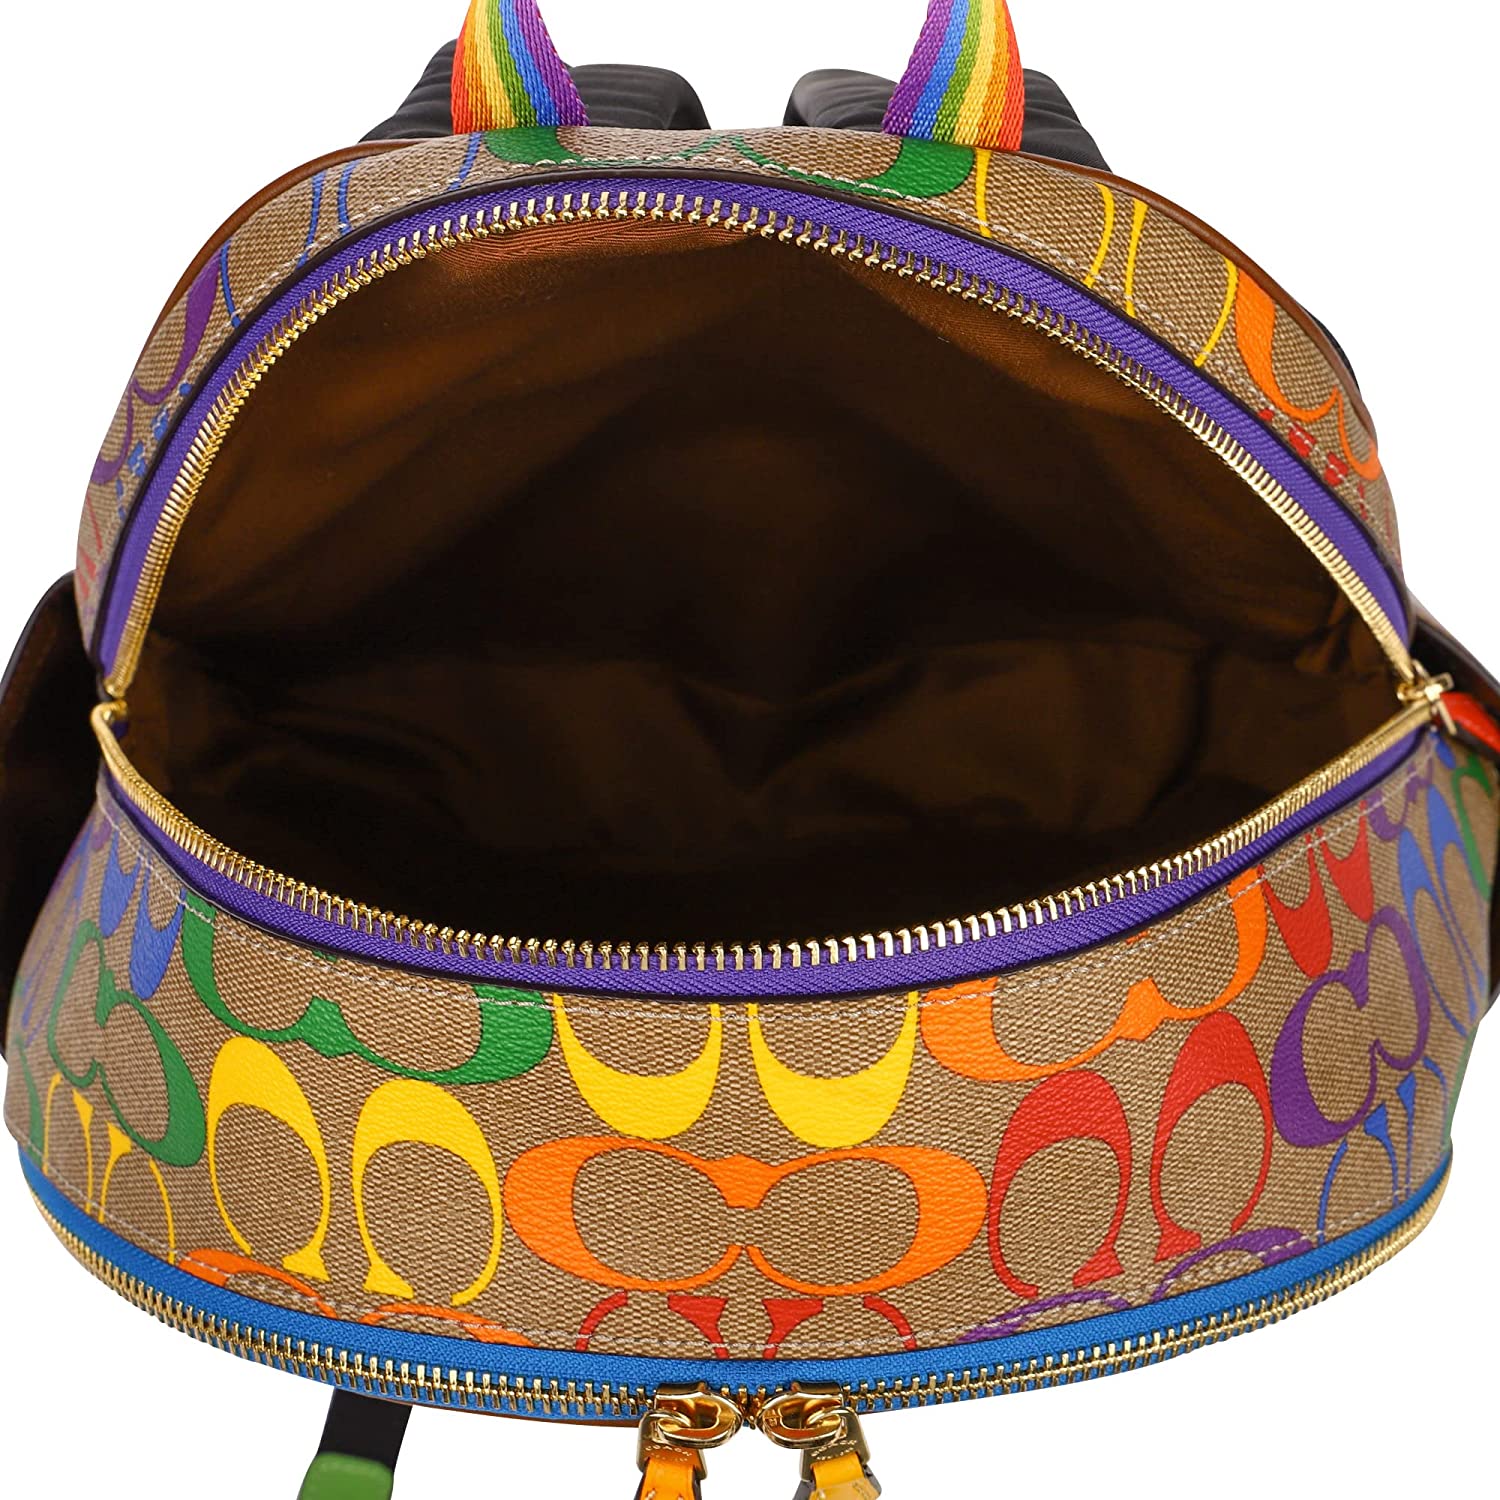 BALO NỮ CẦU VỒNG COACH COURT BACKPACK IN RAINBOW SIGNATURE CANVAS CA140 4